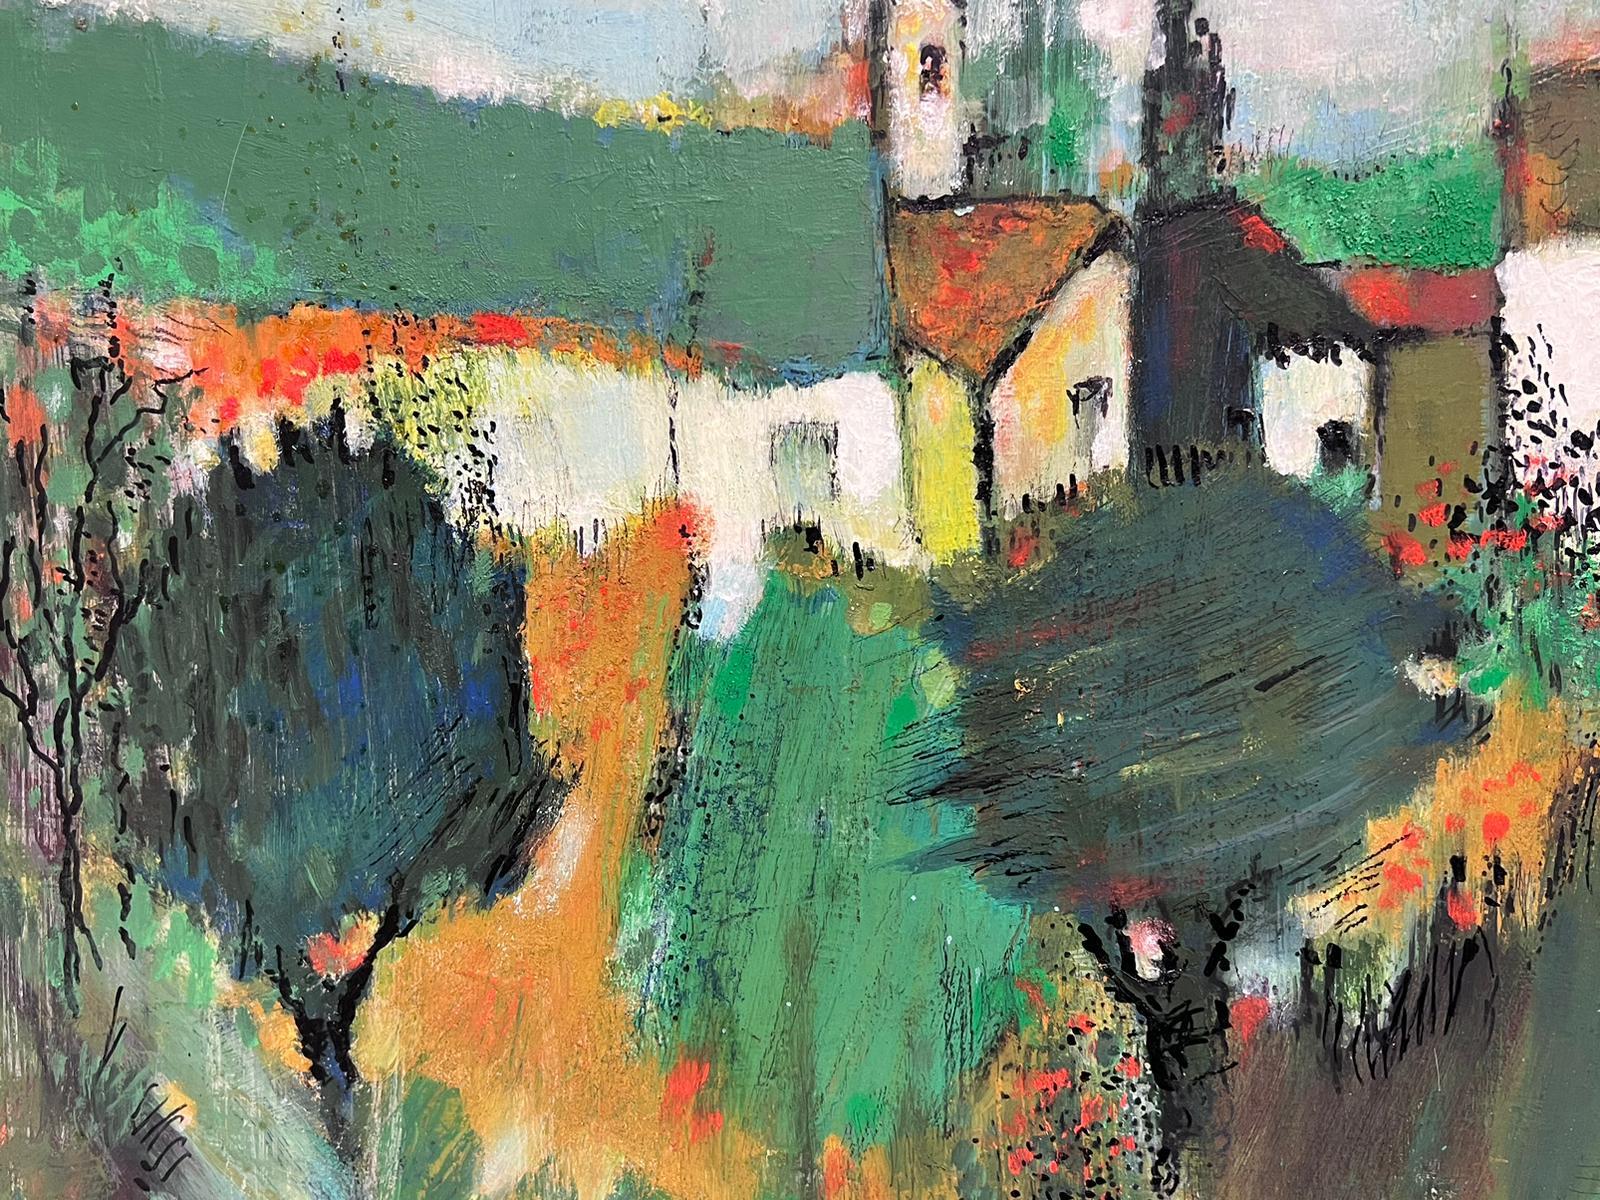 The Country Village
by Andre Guillou (French 1925-2017)
signed oil on canvas
dated 2000
canvas: 20 x 26 inches
provenance: private collection, France
condition: very good and sound condition